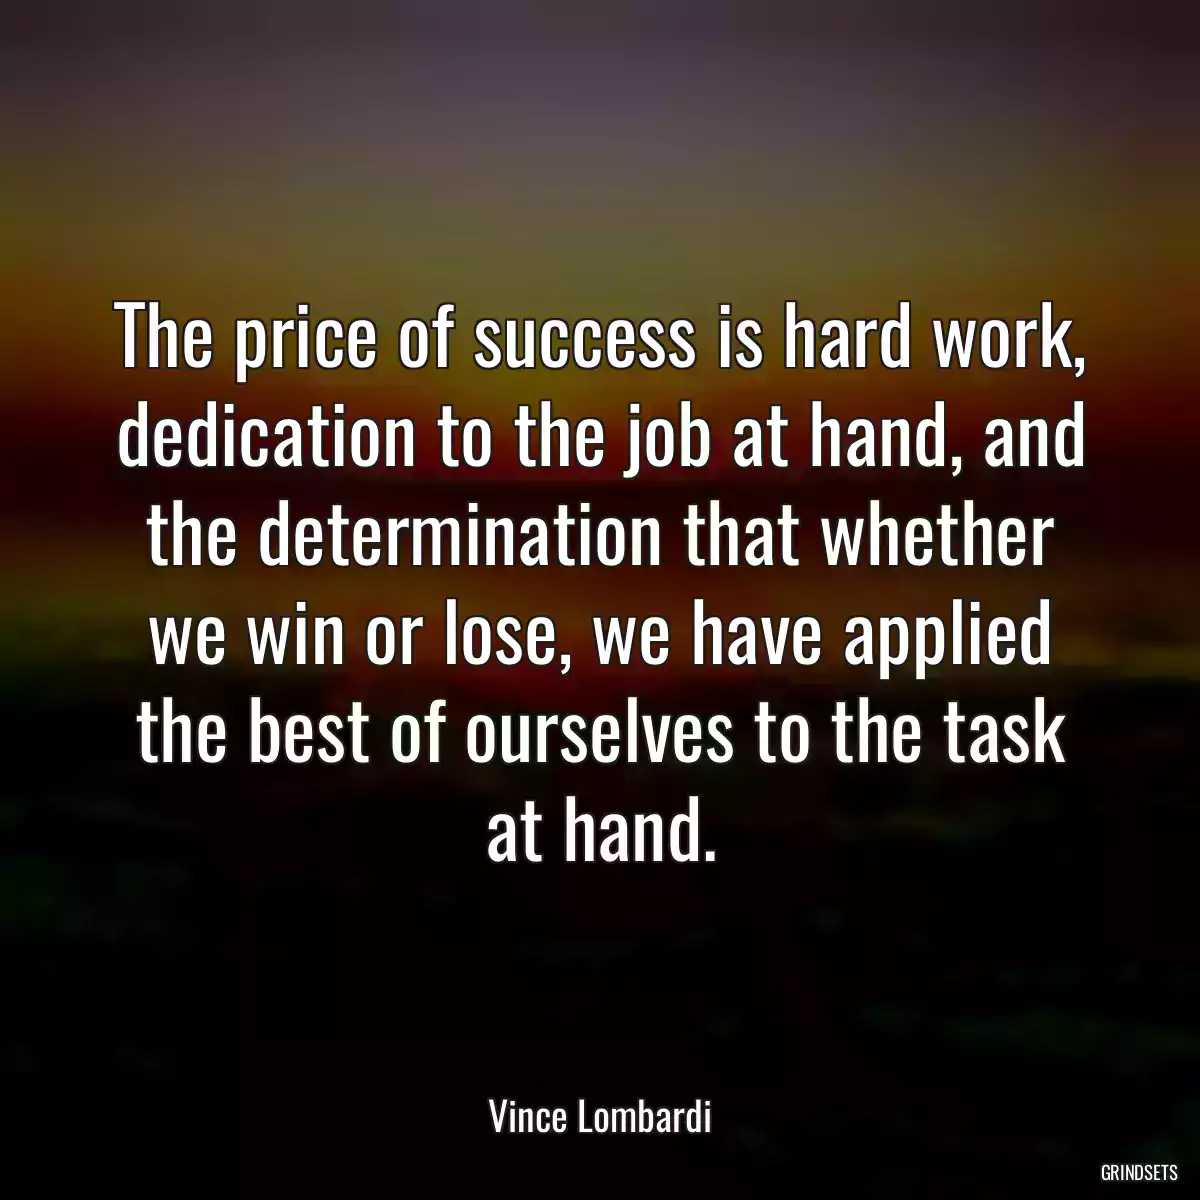 The price of success is hard work, dedication to the job at hand, and the determination that whether we win or lose, we have applied the best of ourselves to the task at hand.